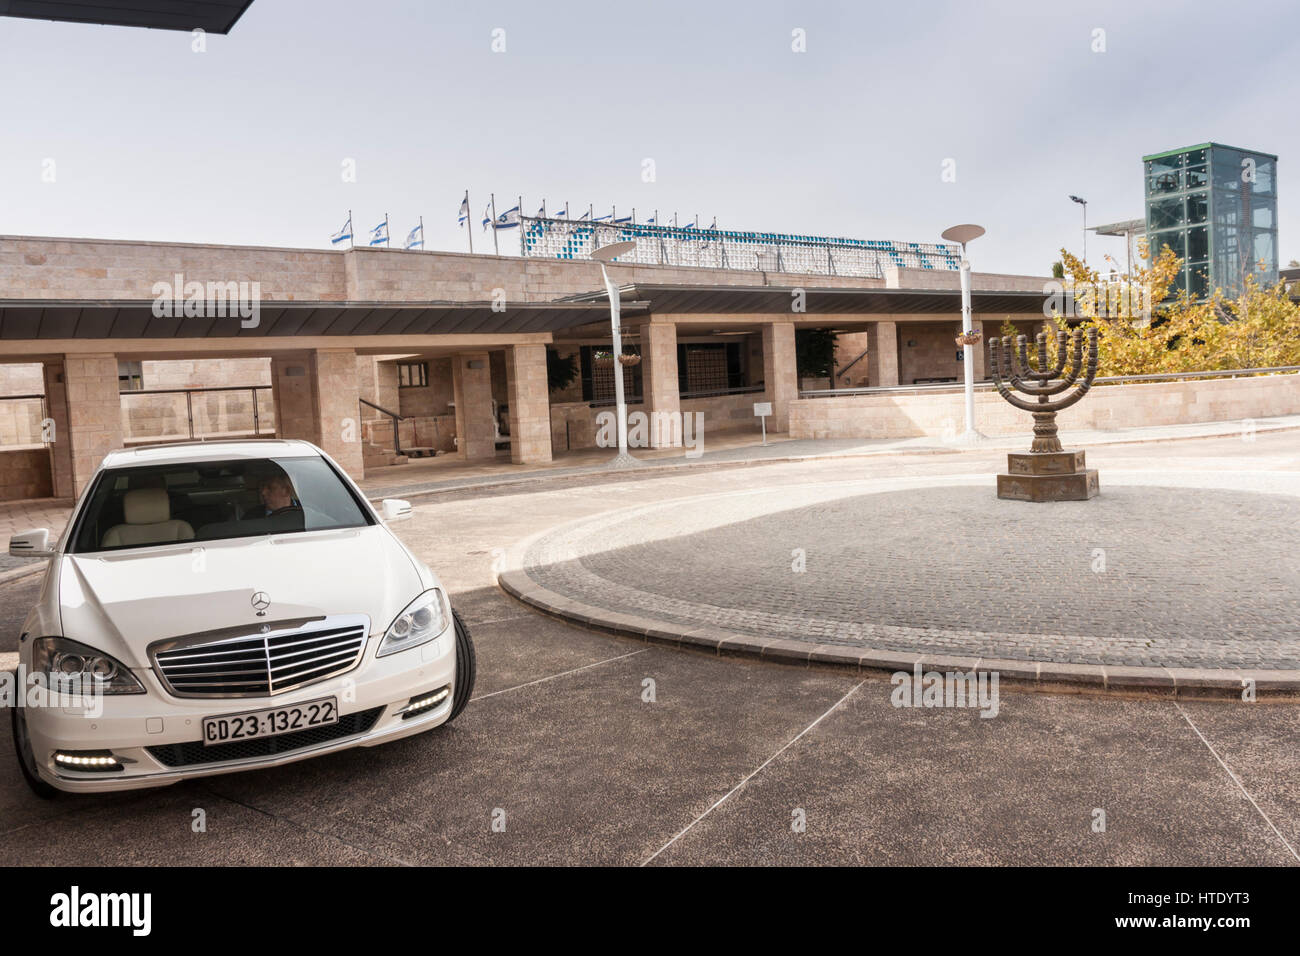 Jerusalem, Israel. The  Knesset - the Israeli parliament. The Menora (Jewish candelabra), a symbol of the state of Israel, stands in traffic circle Stock Photo